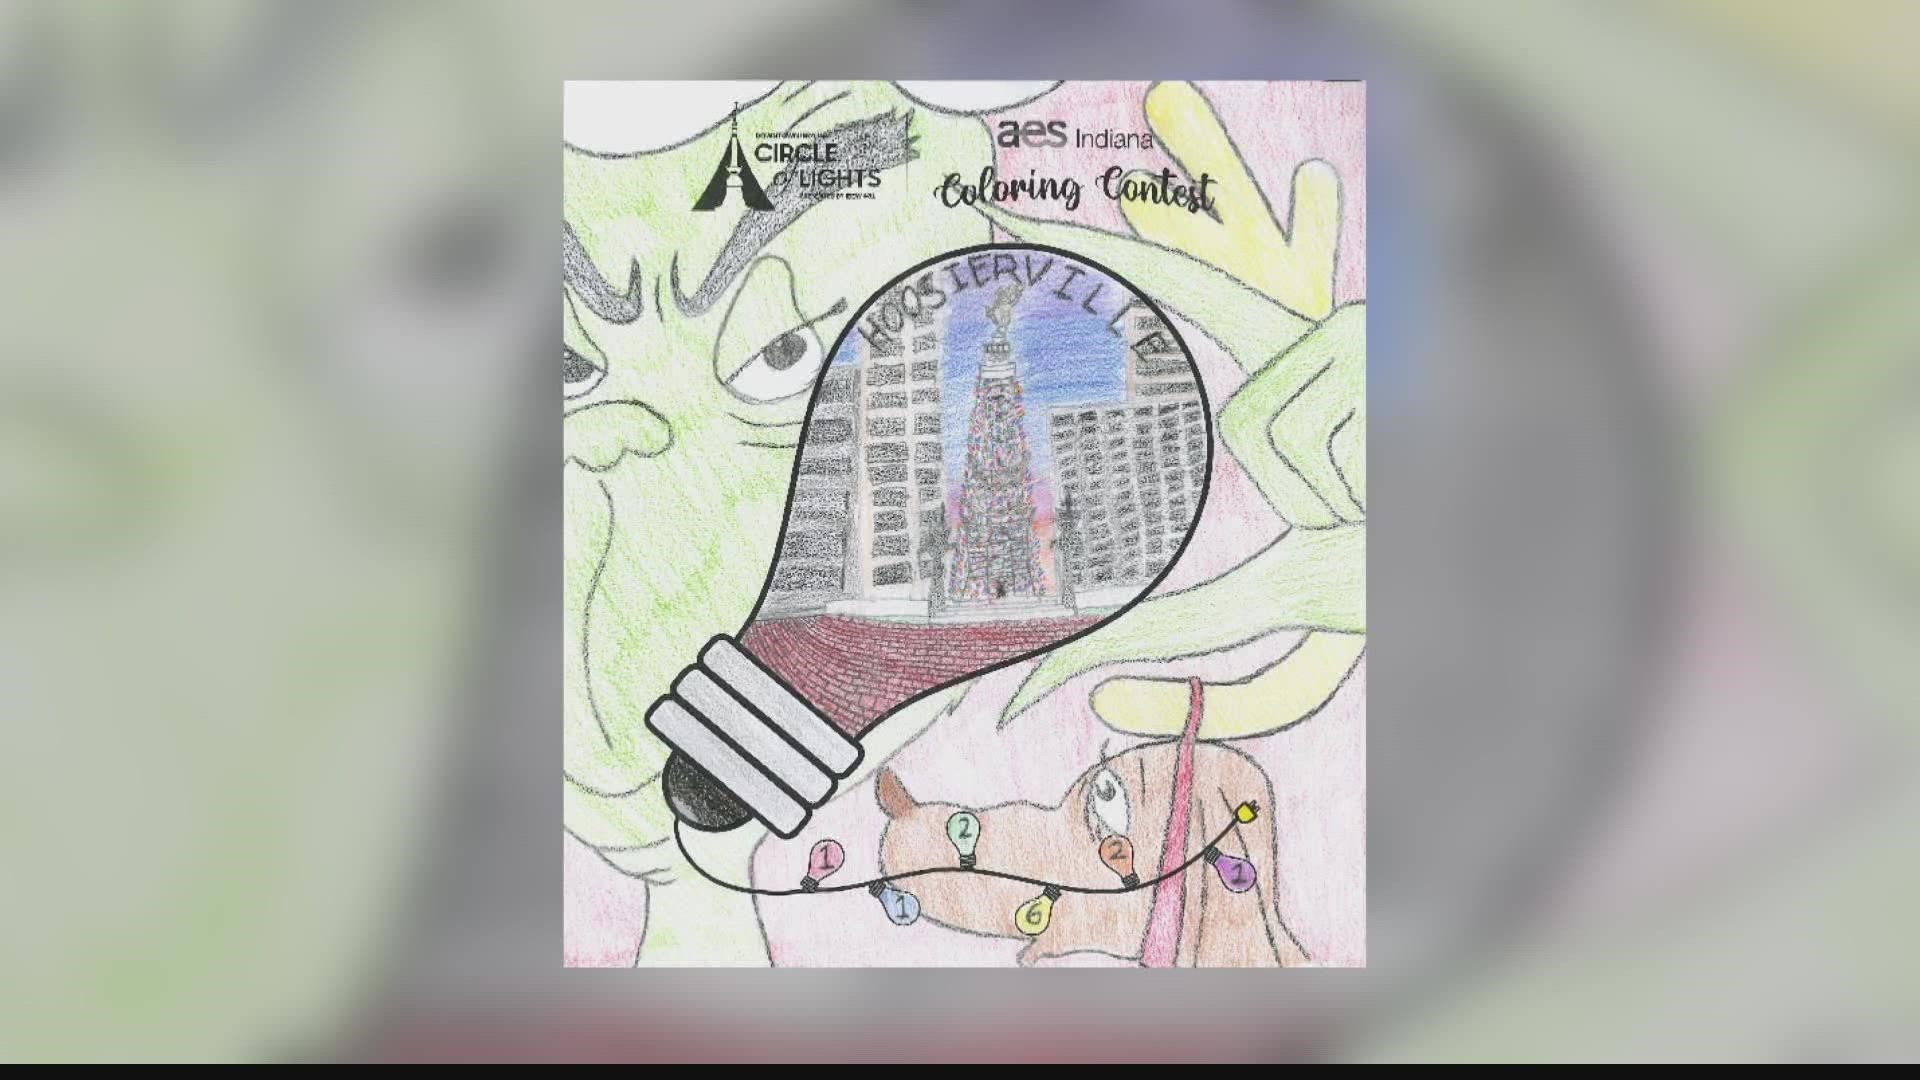 Chuck Lofton revealed the Circle of Lights Coloring Contest winner Monday on Monument Circle live on 13News at Noon.